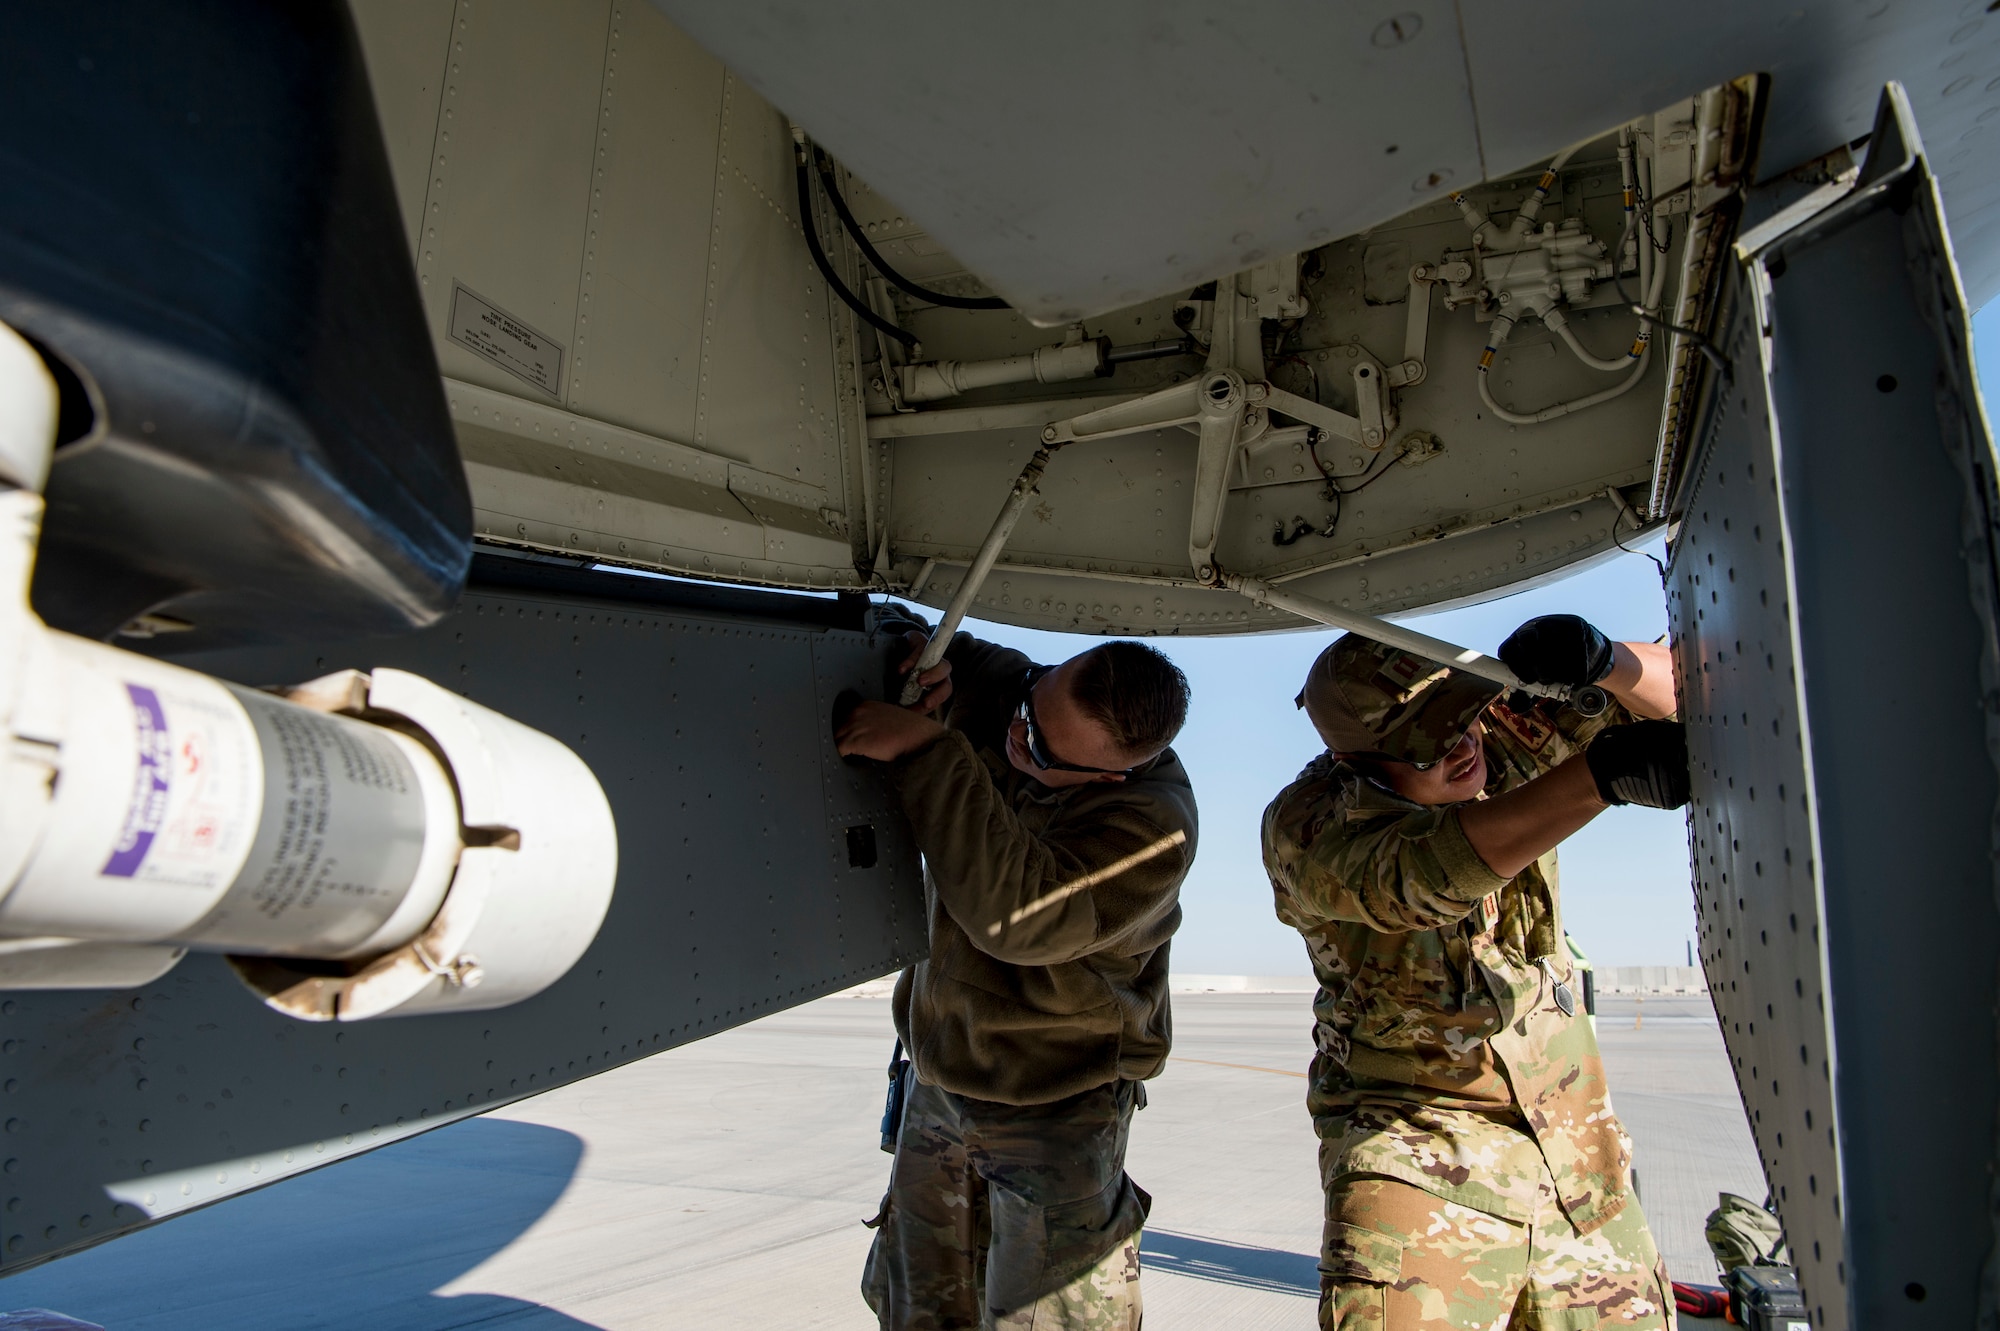 A U.S. Air Force pilot assigned to the 28th Expeditionary Air Refueling Squadron, right, and a U.S. Air Force crew chief assigned to the 385th Expeditionary Aircraft Maintenance perform a preflight inspection on a KC-135 Stratotanker at Al Udeid Air Base, Qatar, Jan. 14, 2020.